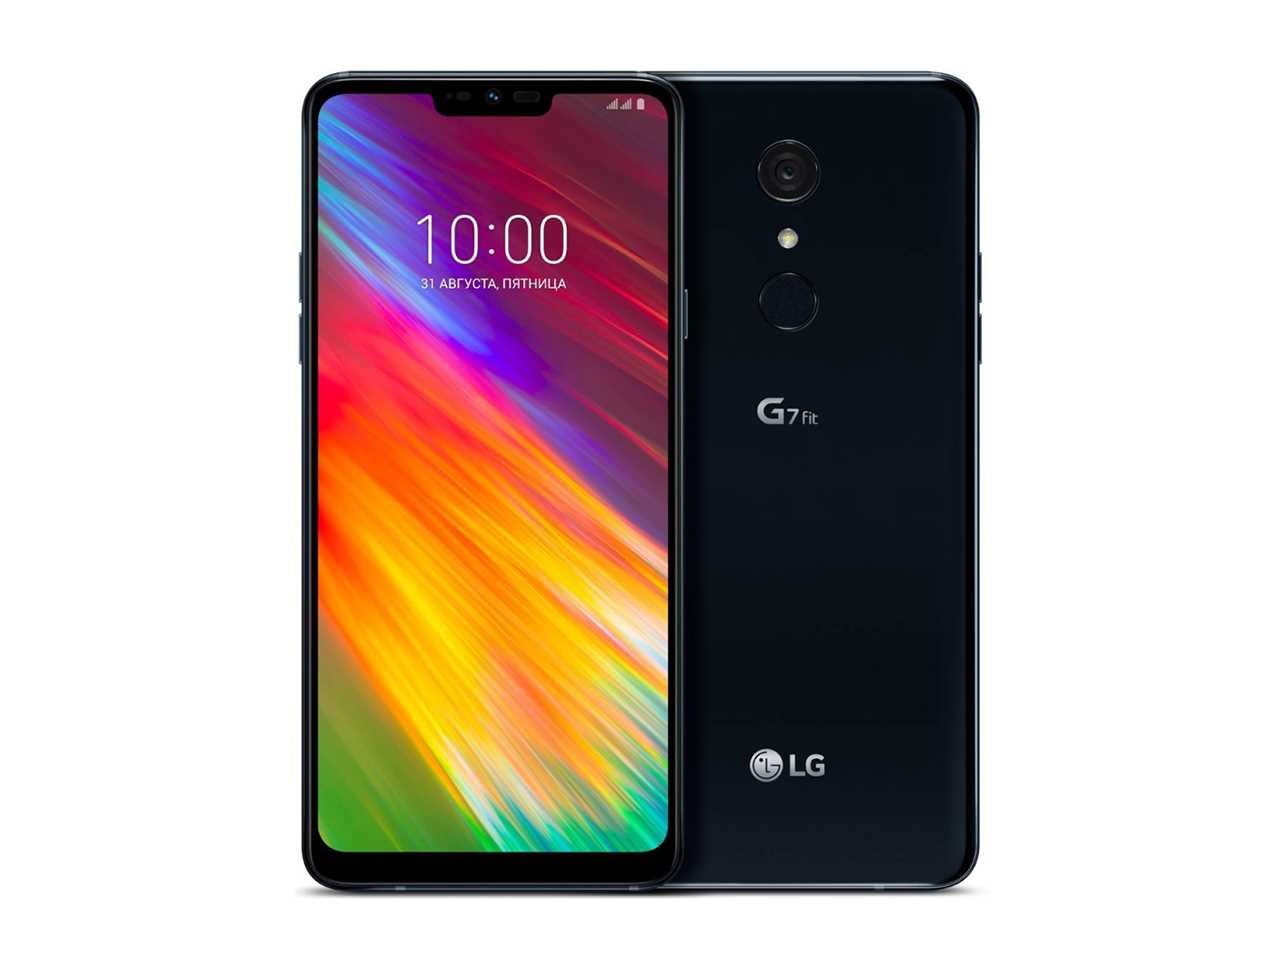 lg-magazine_featured-product_lg-g7fit.jpg